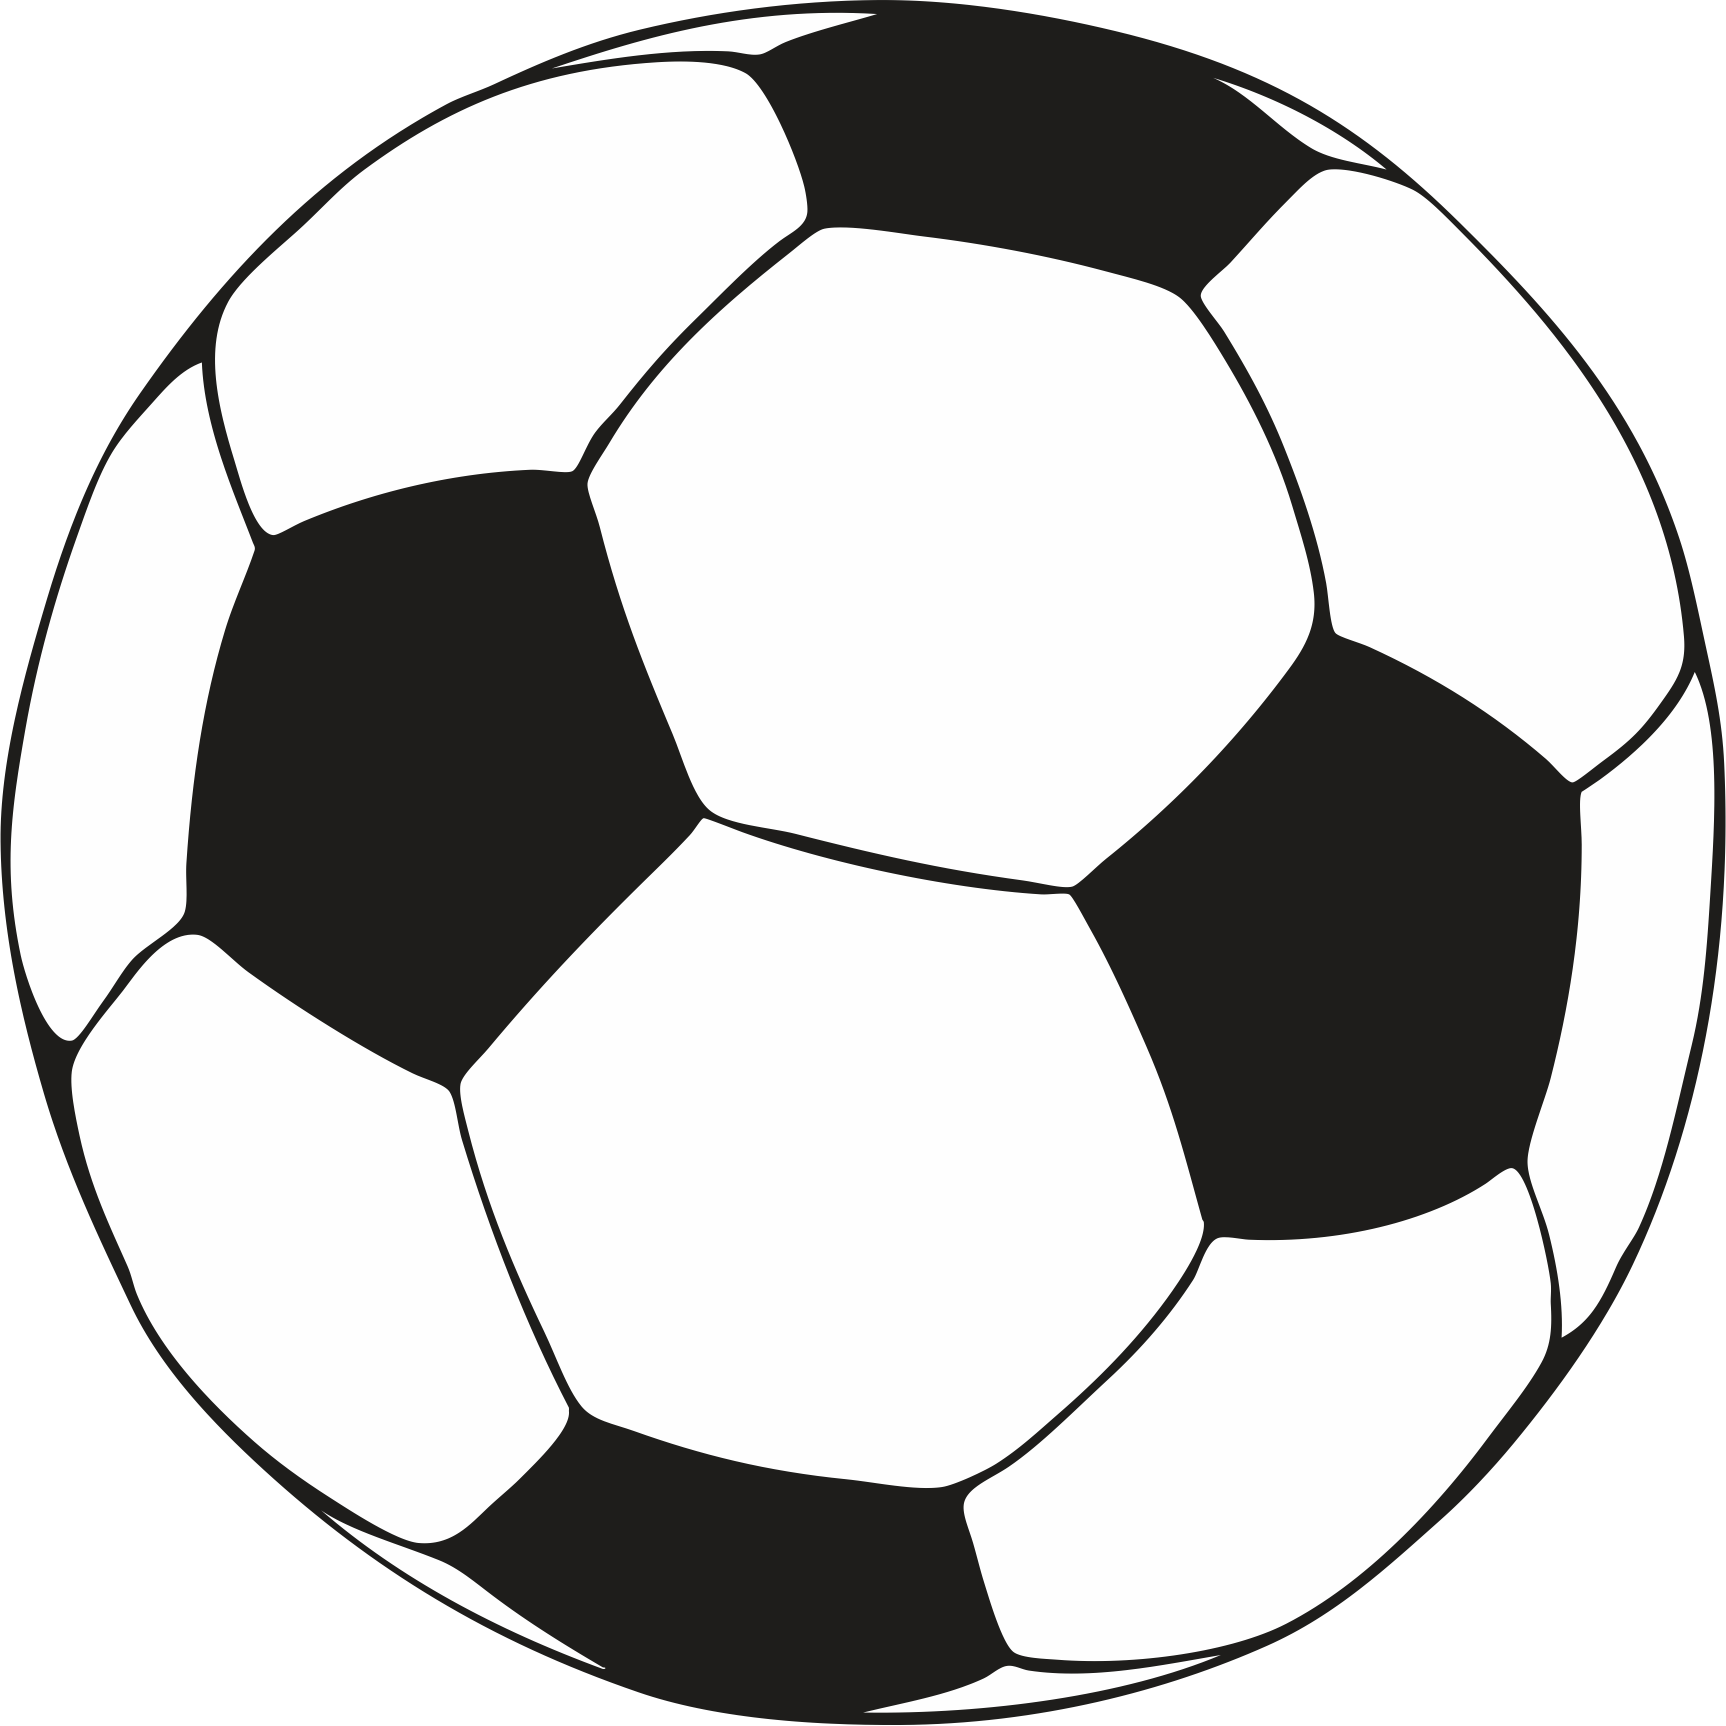 Soccer Ball Coloring Page | Coloring Pages